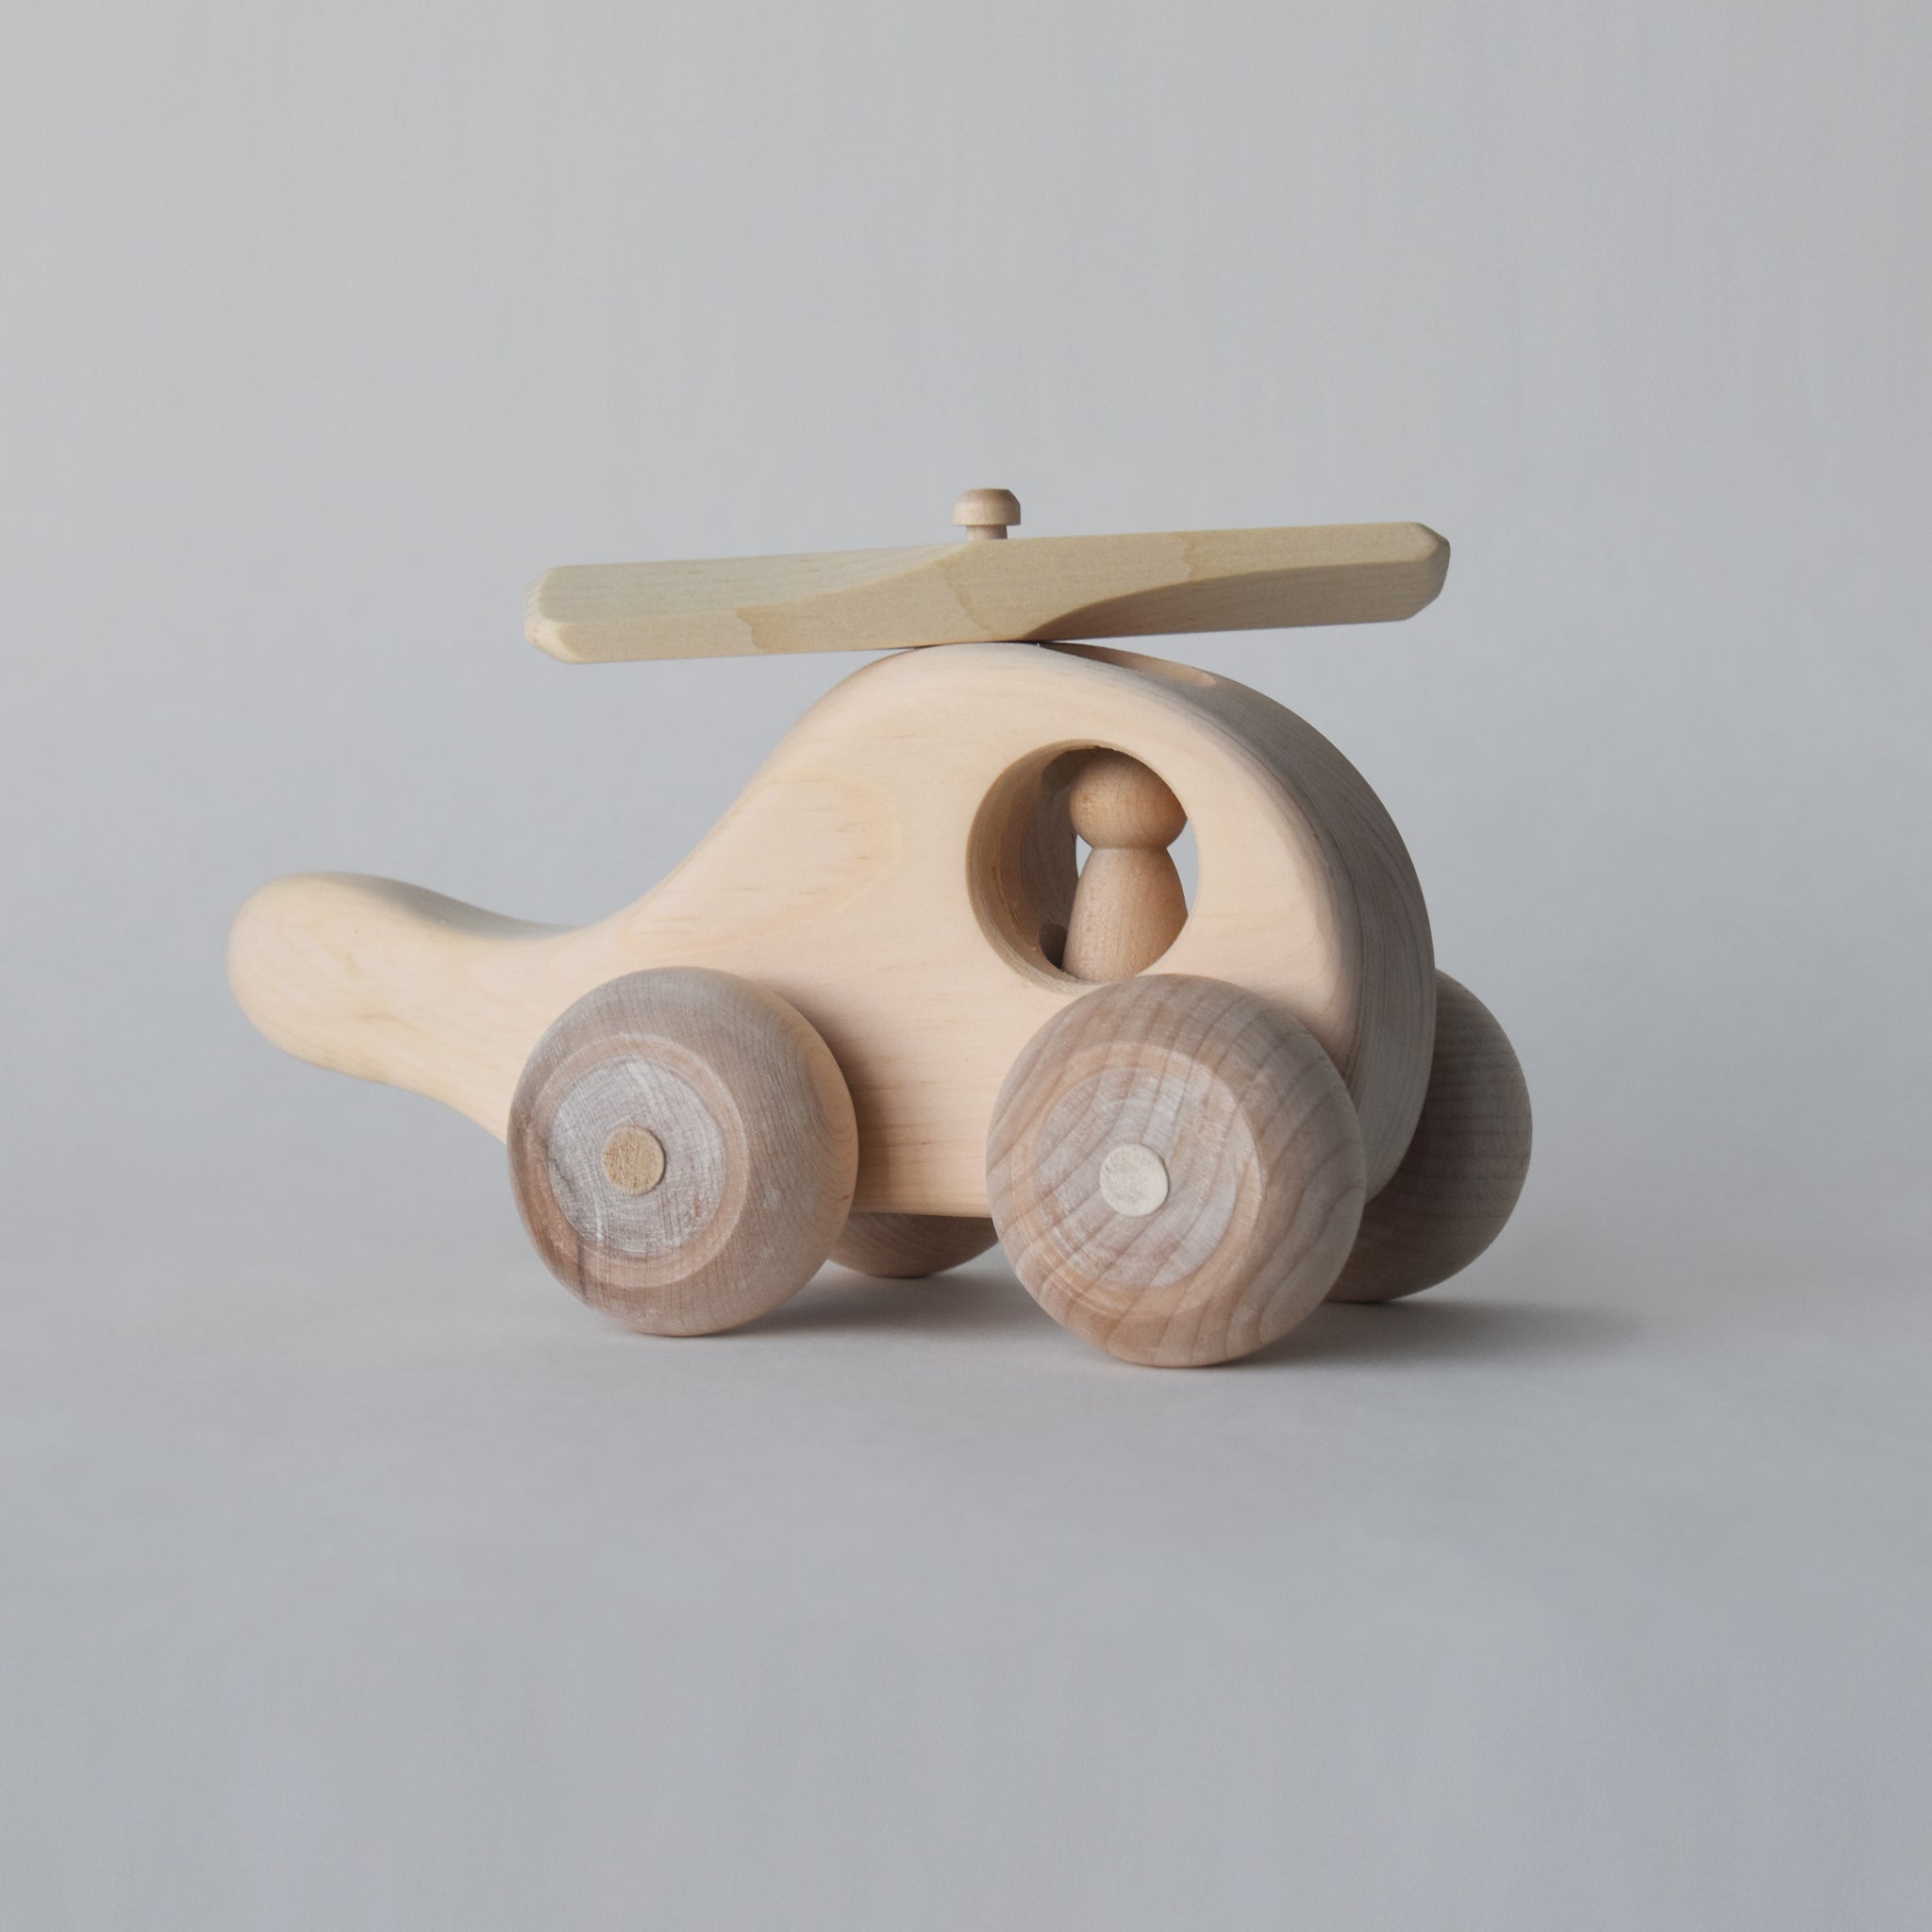 This is the best toy helicopter for those who love handmade wooden toys | Salt Air Supply